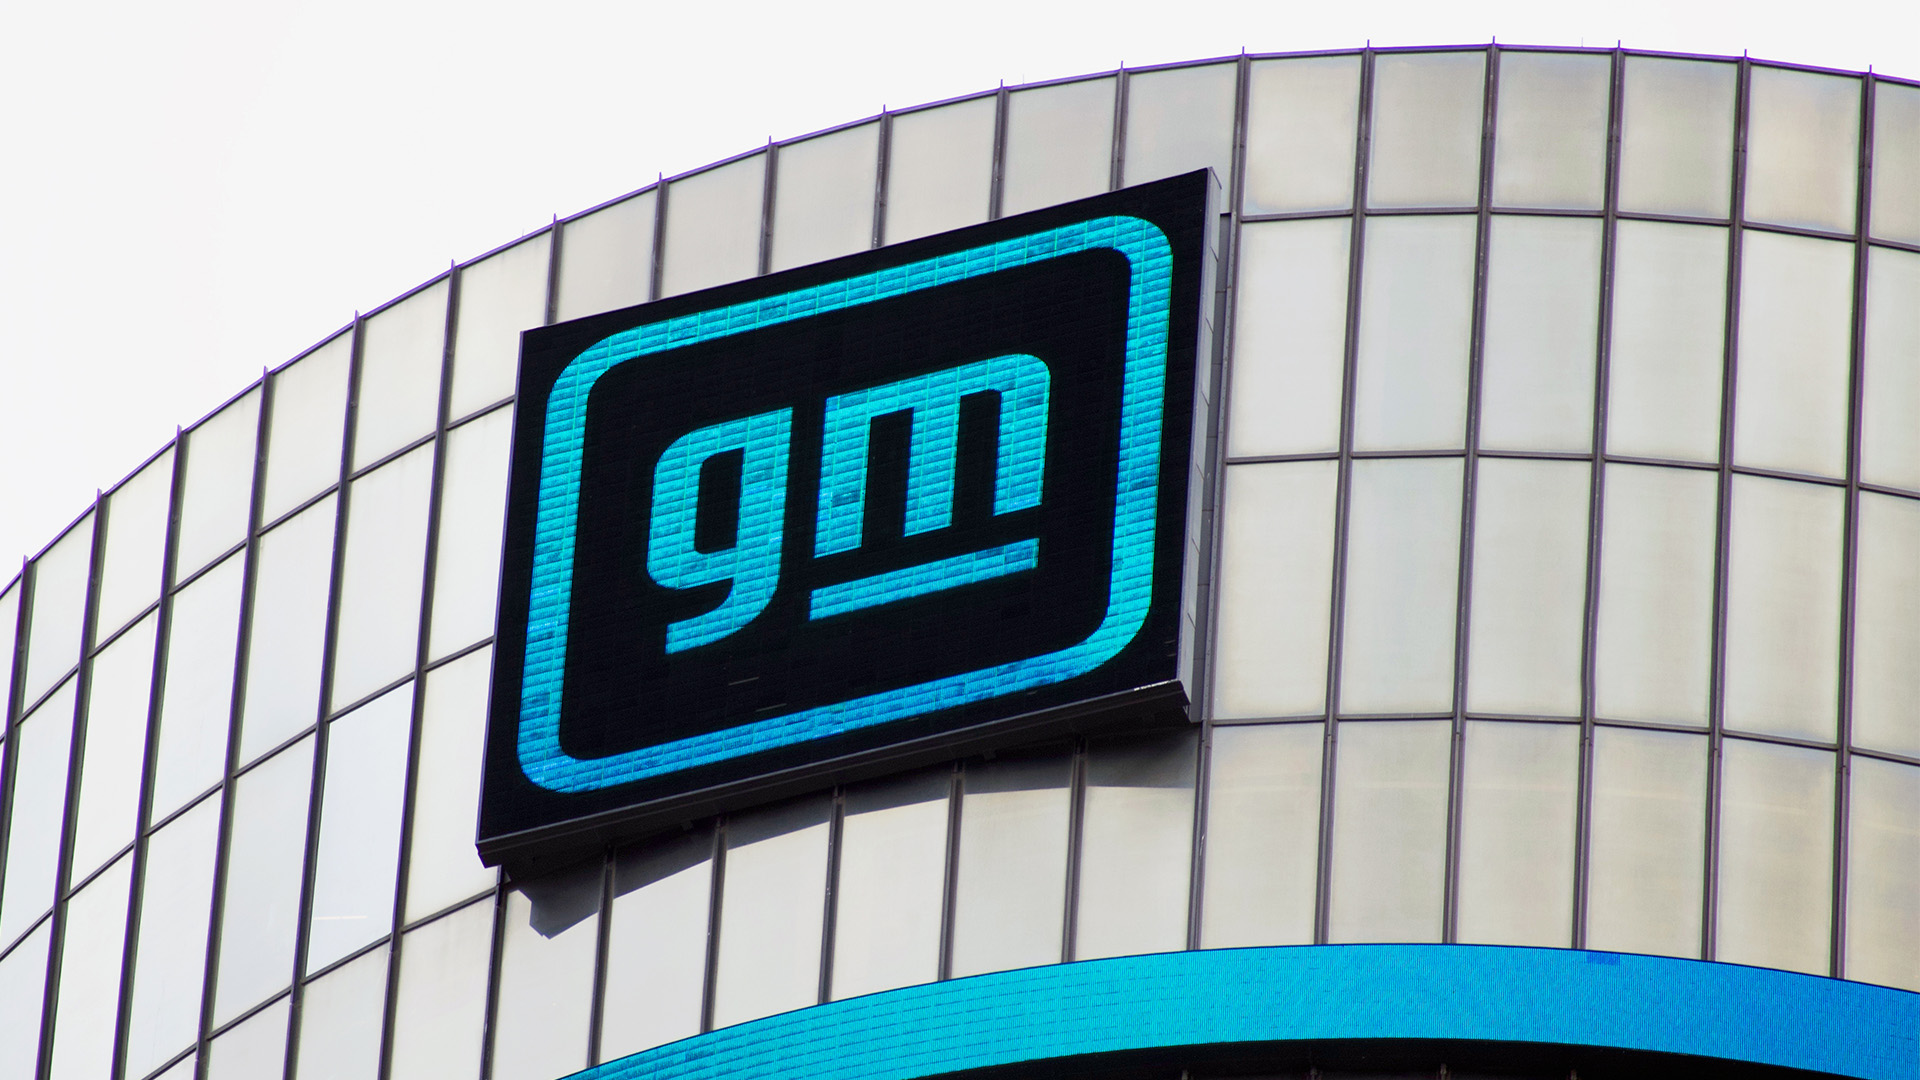 GM’s strong Q1 performance and bullish outlook